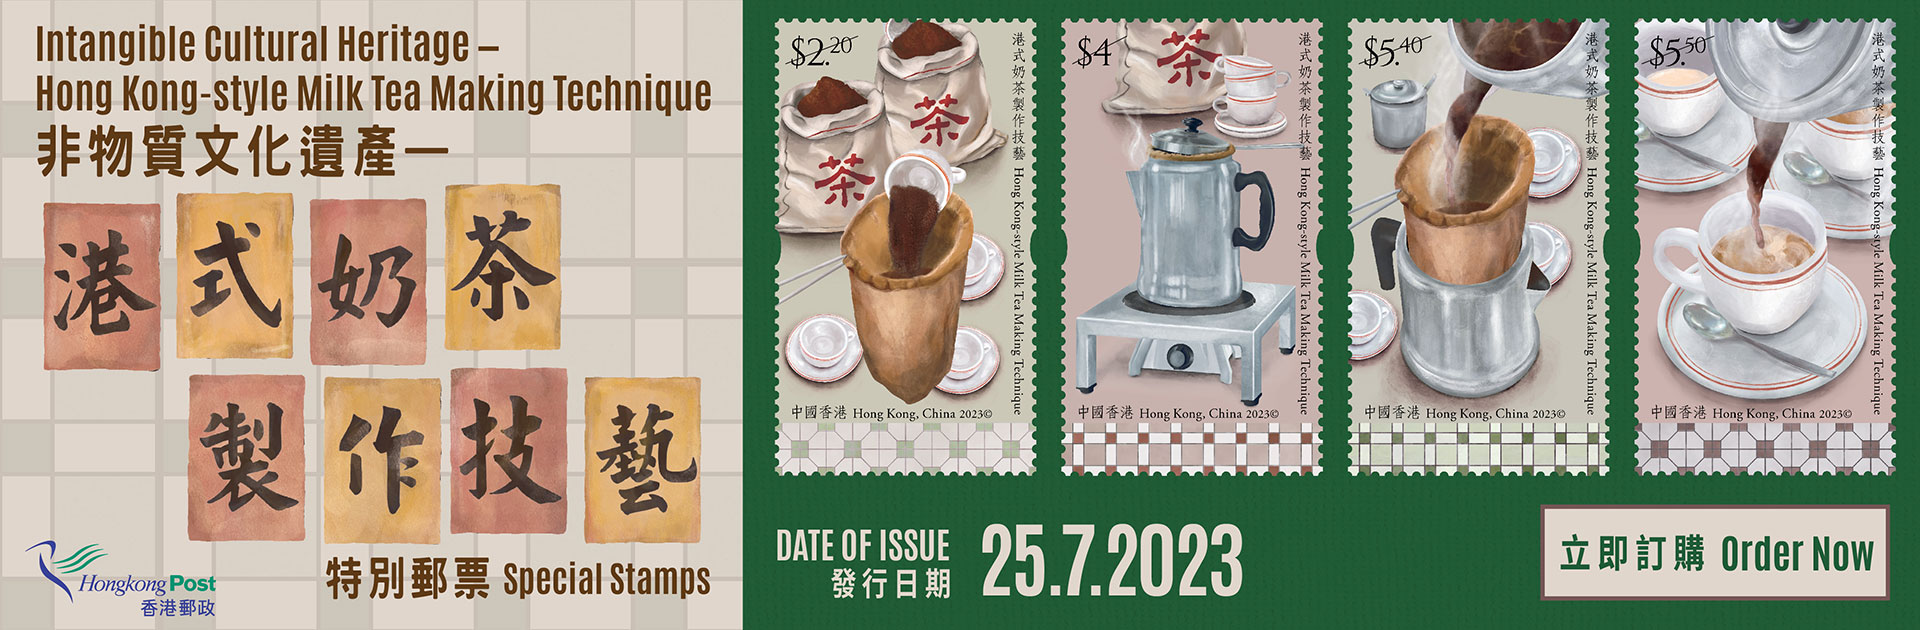 Intangible Cultural Heritage – Hong Kong-style Milk Tea Making Technique